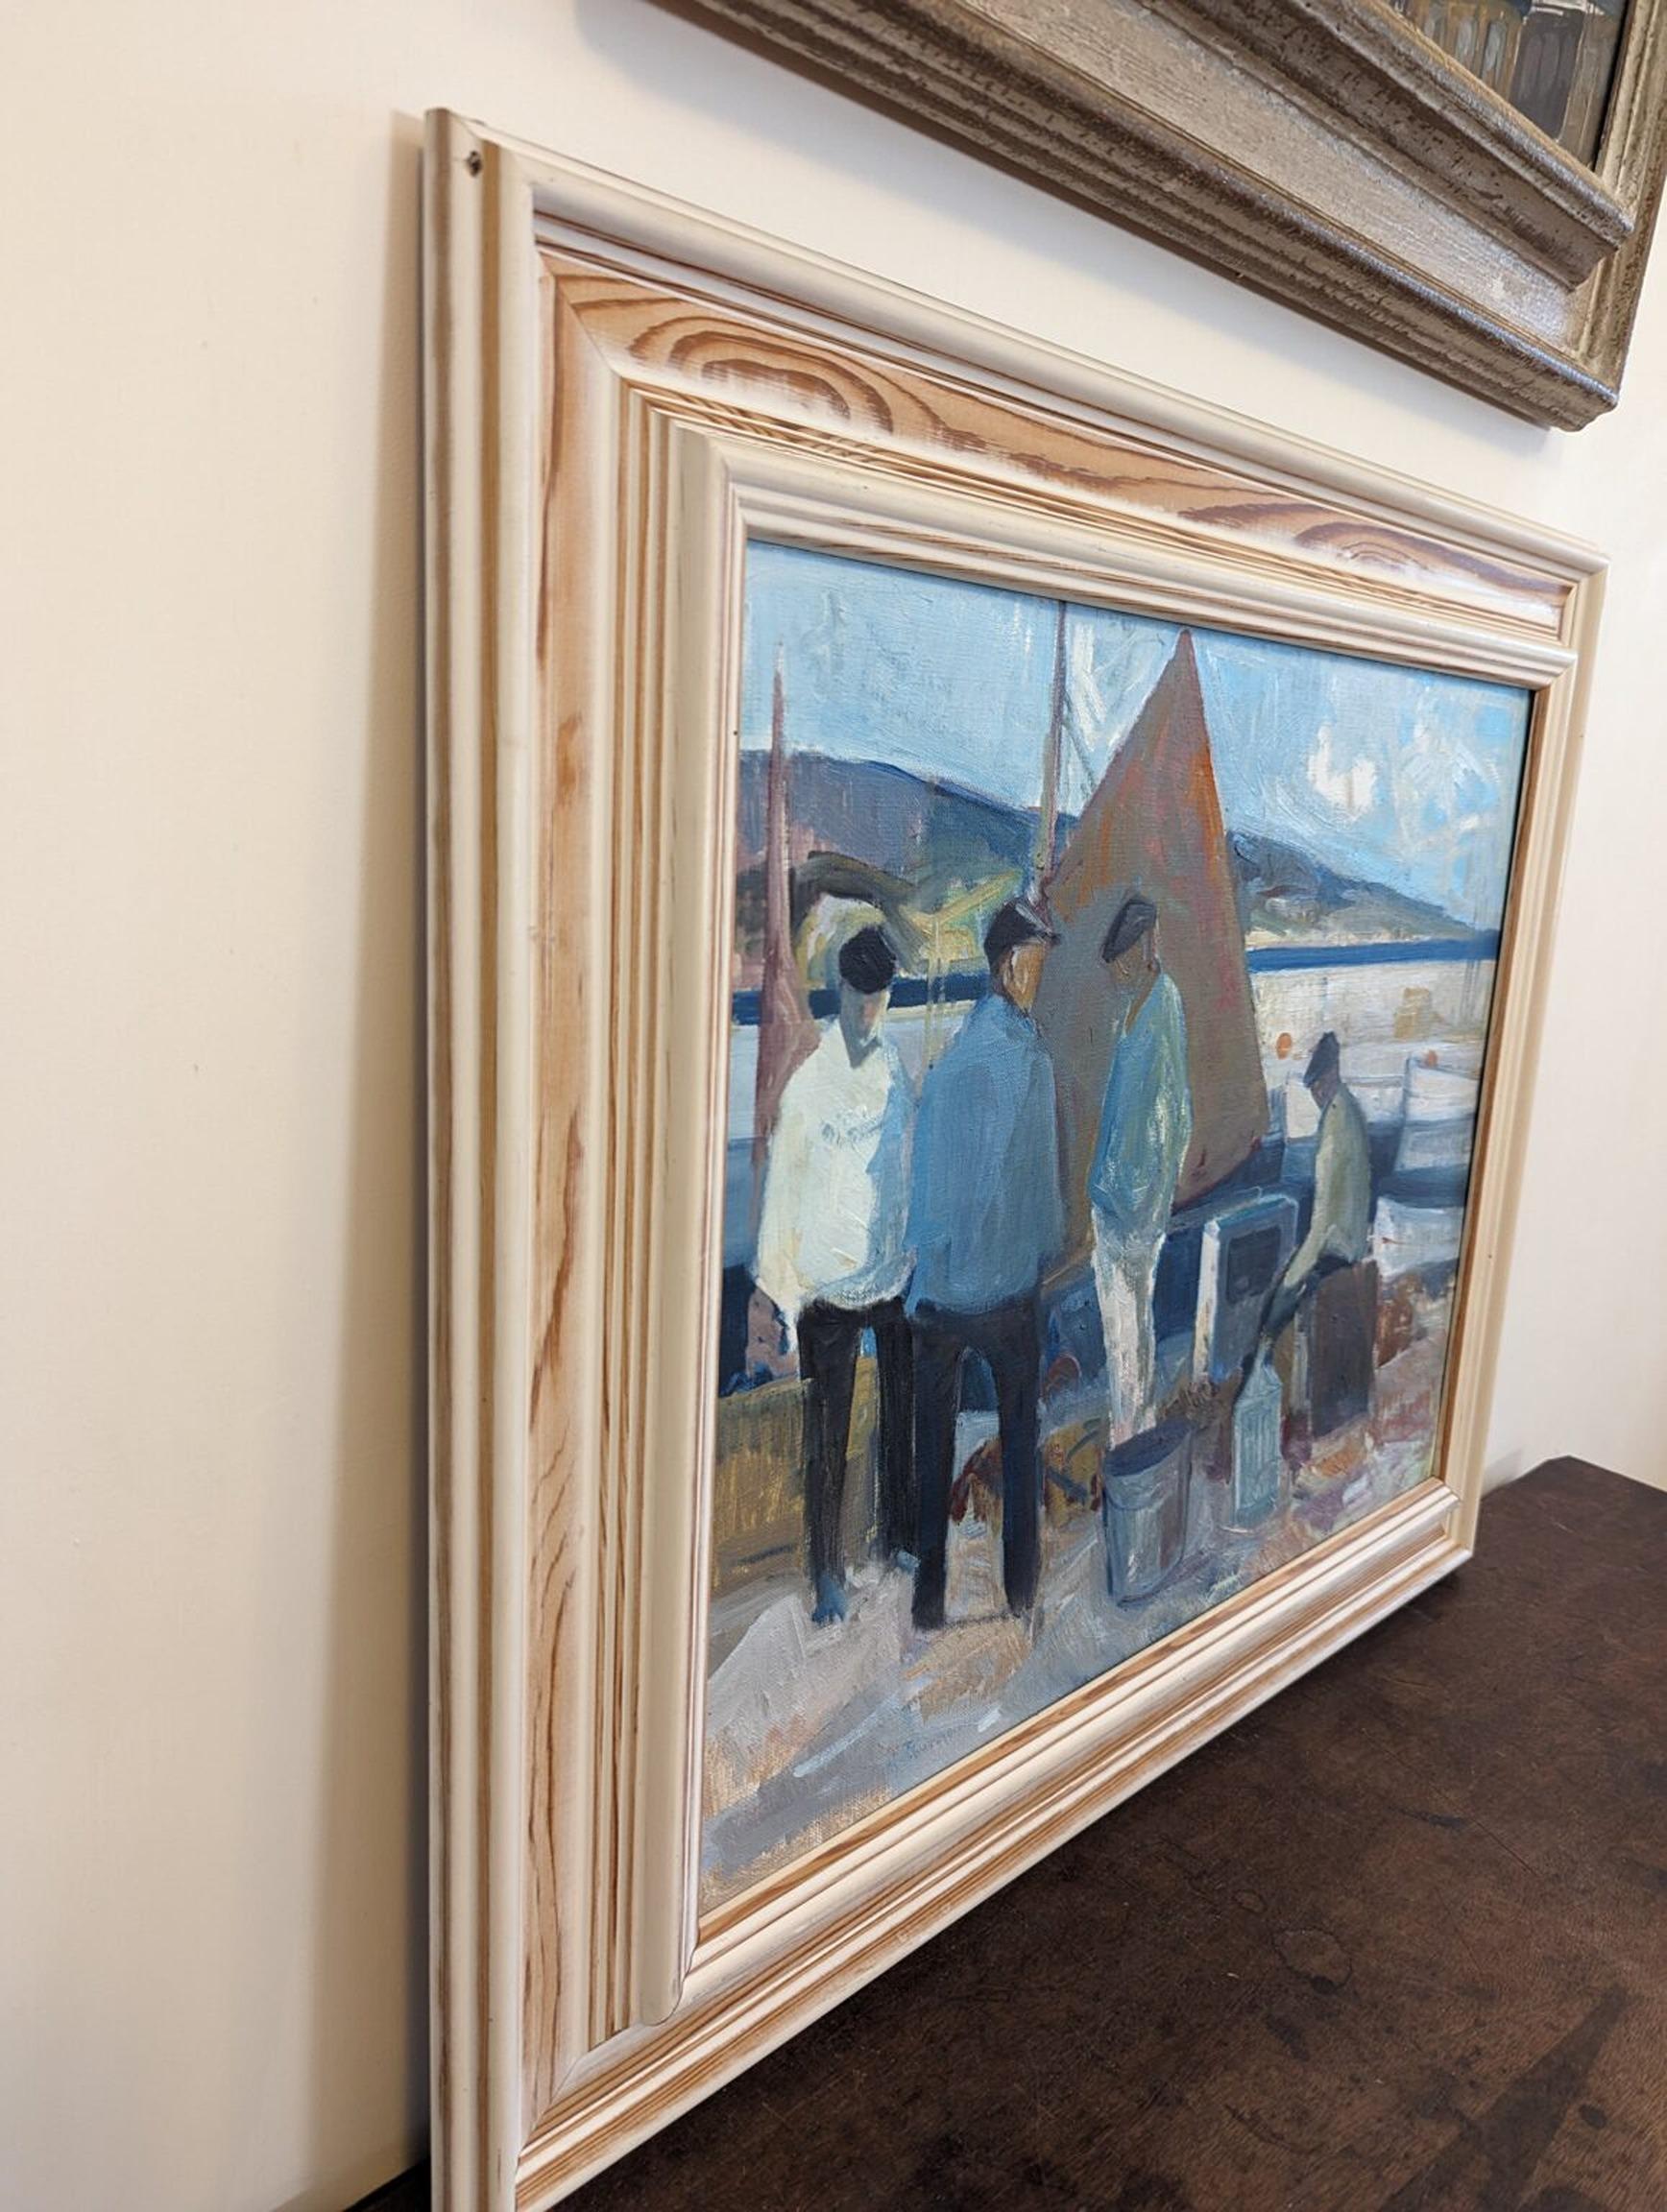 BY THE BOATS
Size: 54 x 64 cm (including frame)
Oil on Canvas

A brilliantly executed mid century modernist composition in oil, painted onto canvas.

In this scene we see a group of fishermen around their boats by the docks. They appear to be